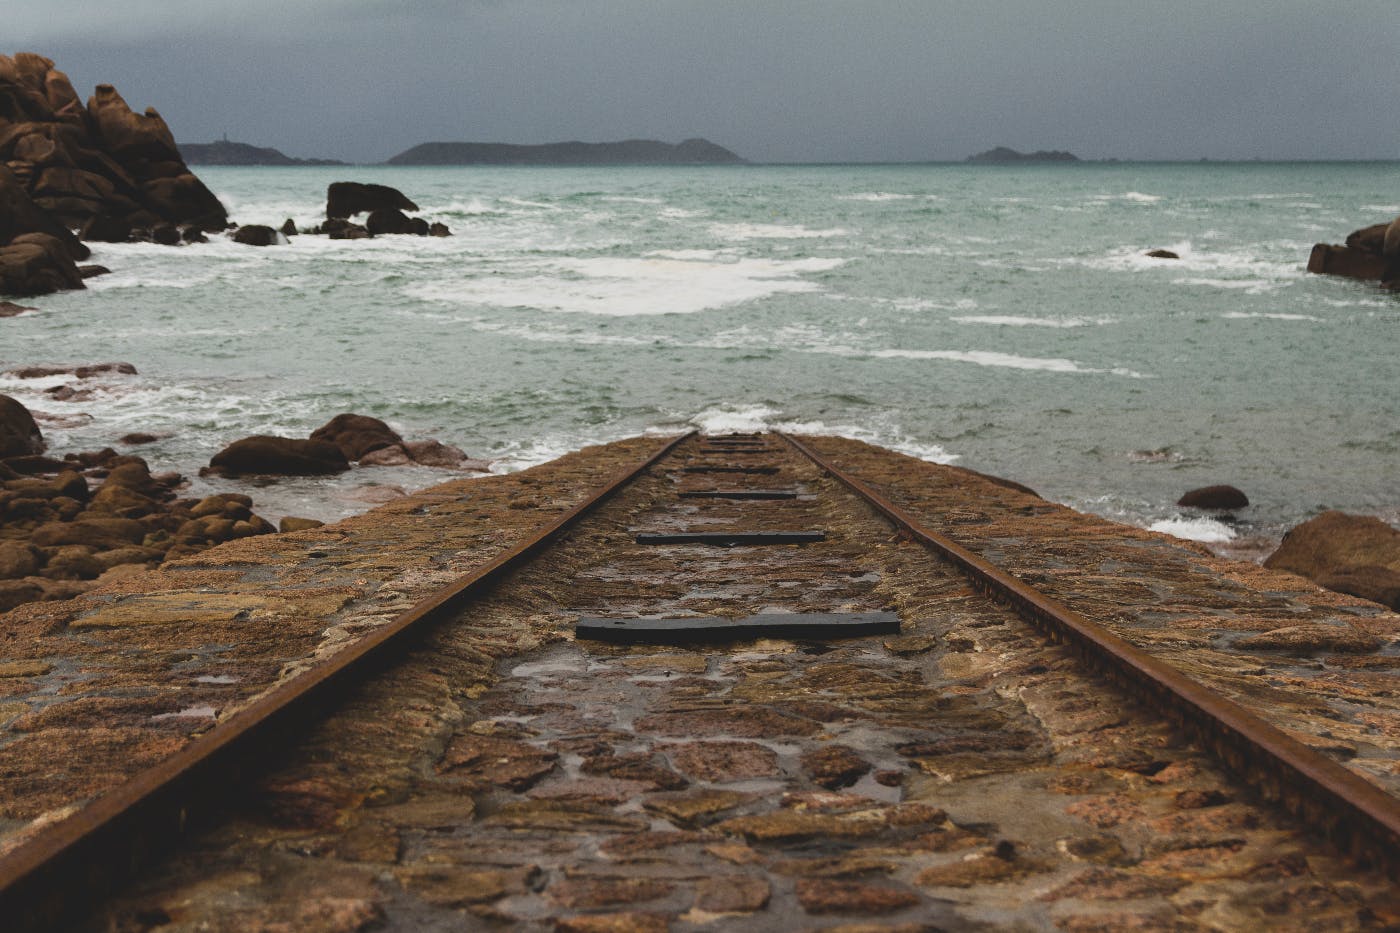 Rusted train tracks edning in the ocean.